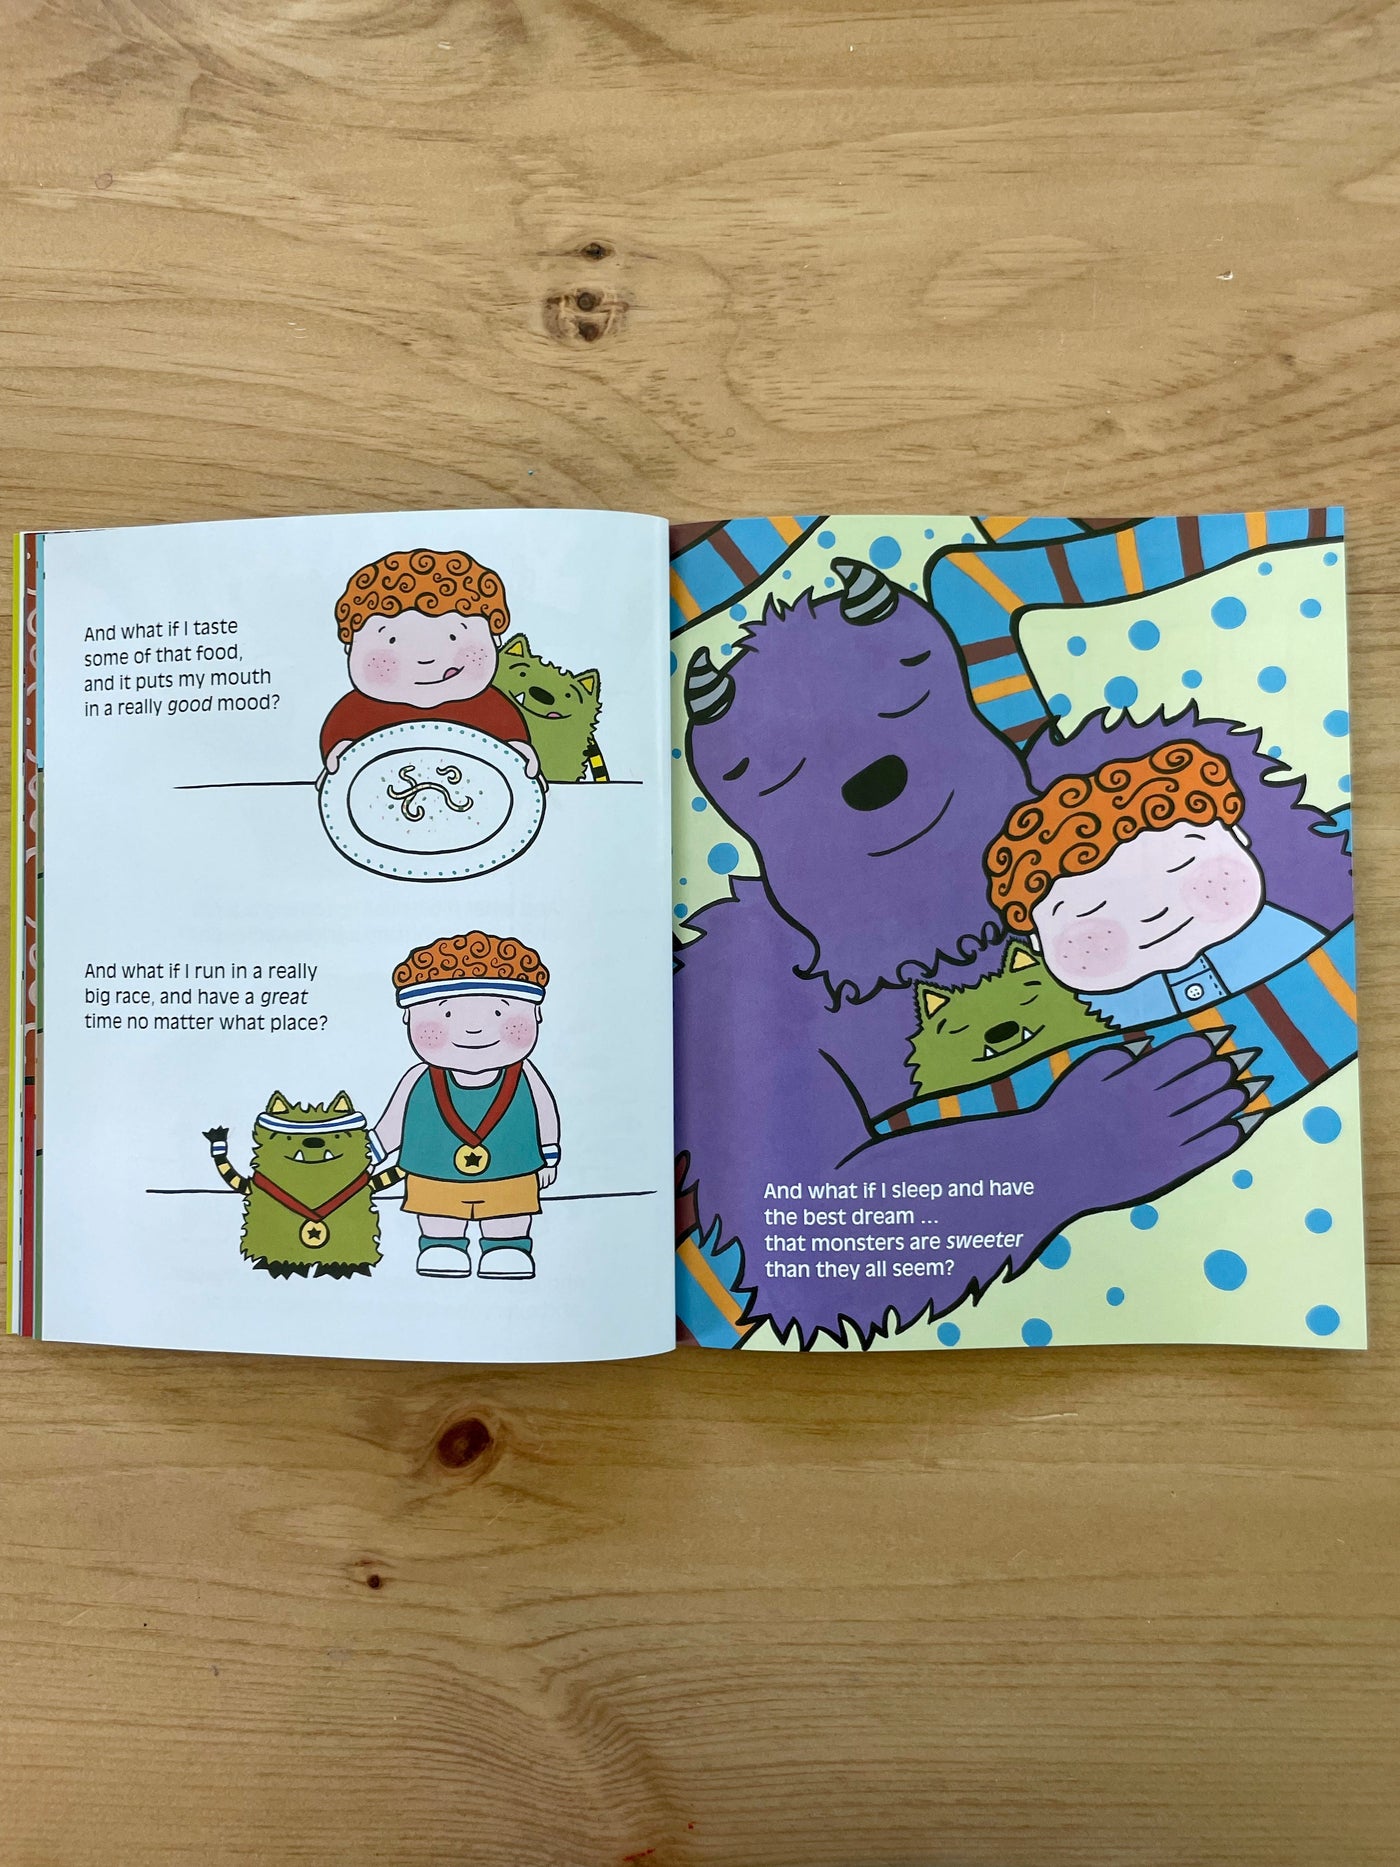 Jonathan James and the Whatif Monster Paperback Picture Book and Anniversary Edition Whatif Monster Plush